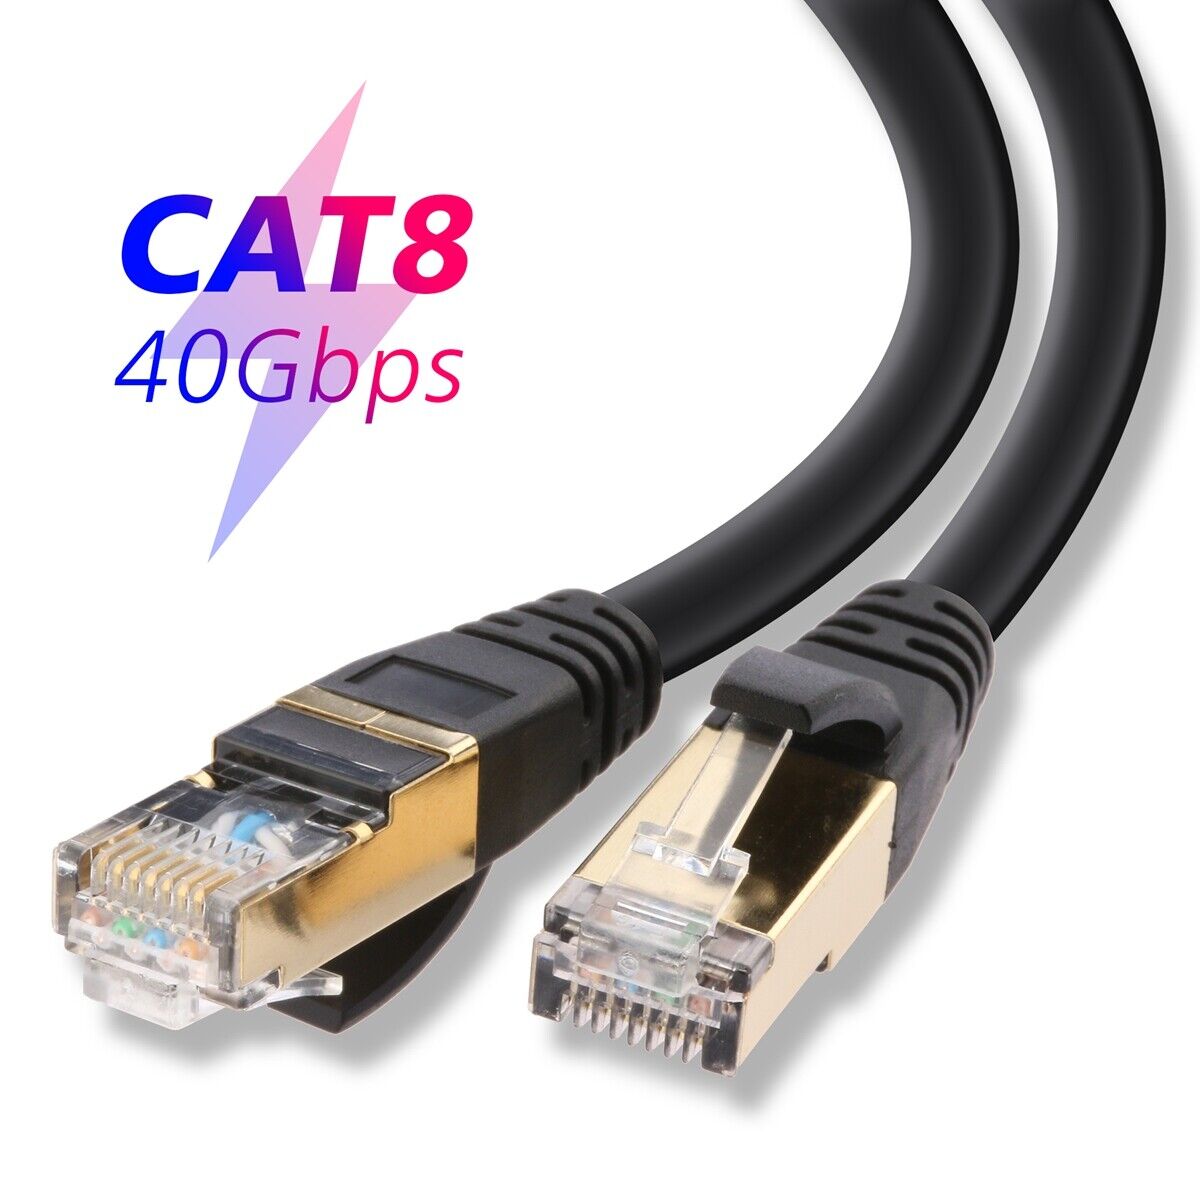 10-100ft Cat8 Cat7 Cat6 Cat5e Ethernet Network Lan HighSpeed Cable 1-10pack Lot